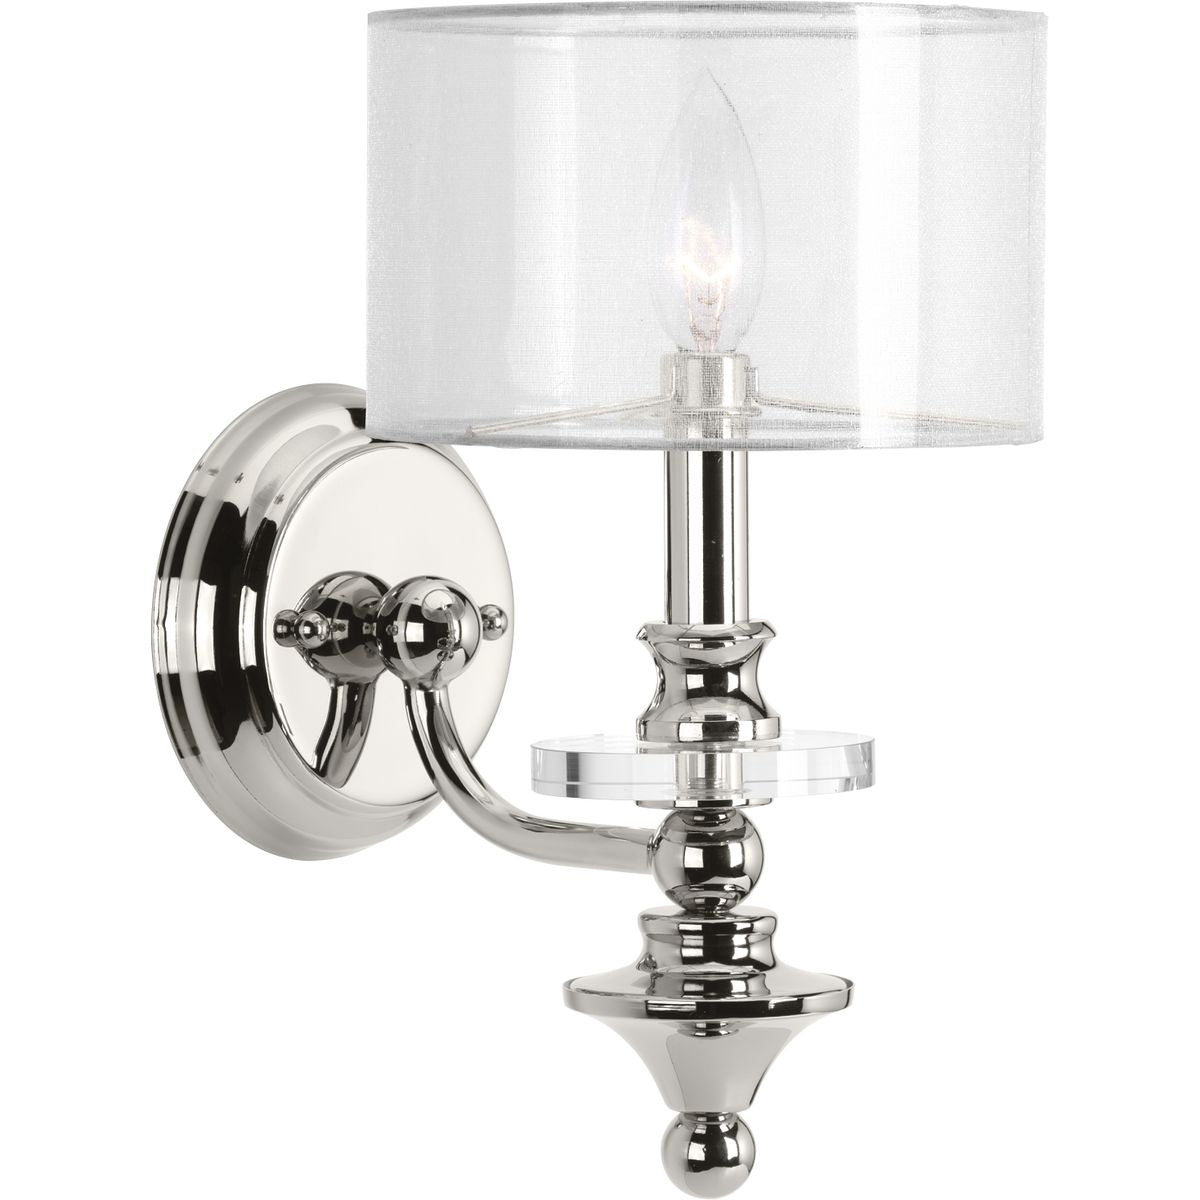 PROGRESS LIGHTING P710013-104 Polished Nickel Marche' Collection One-Light Wall Sconce